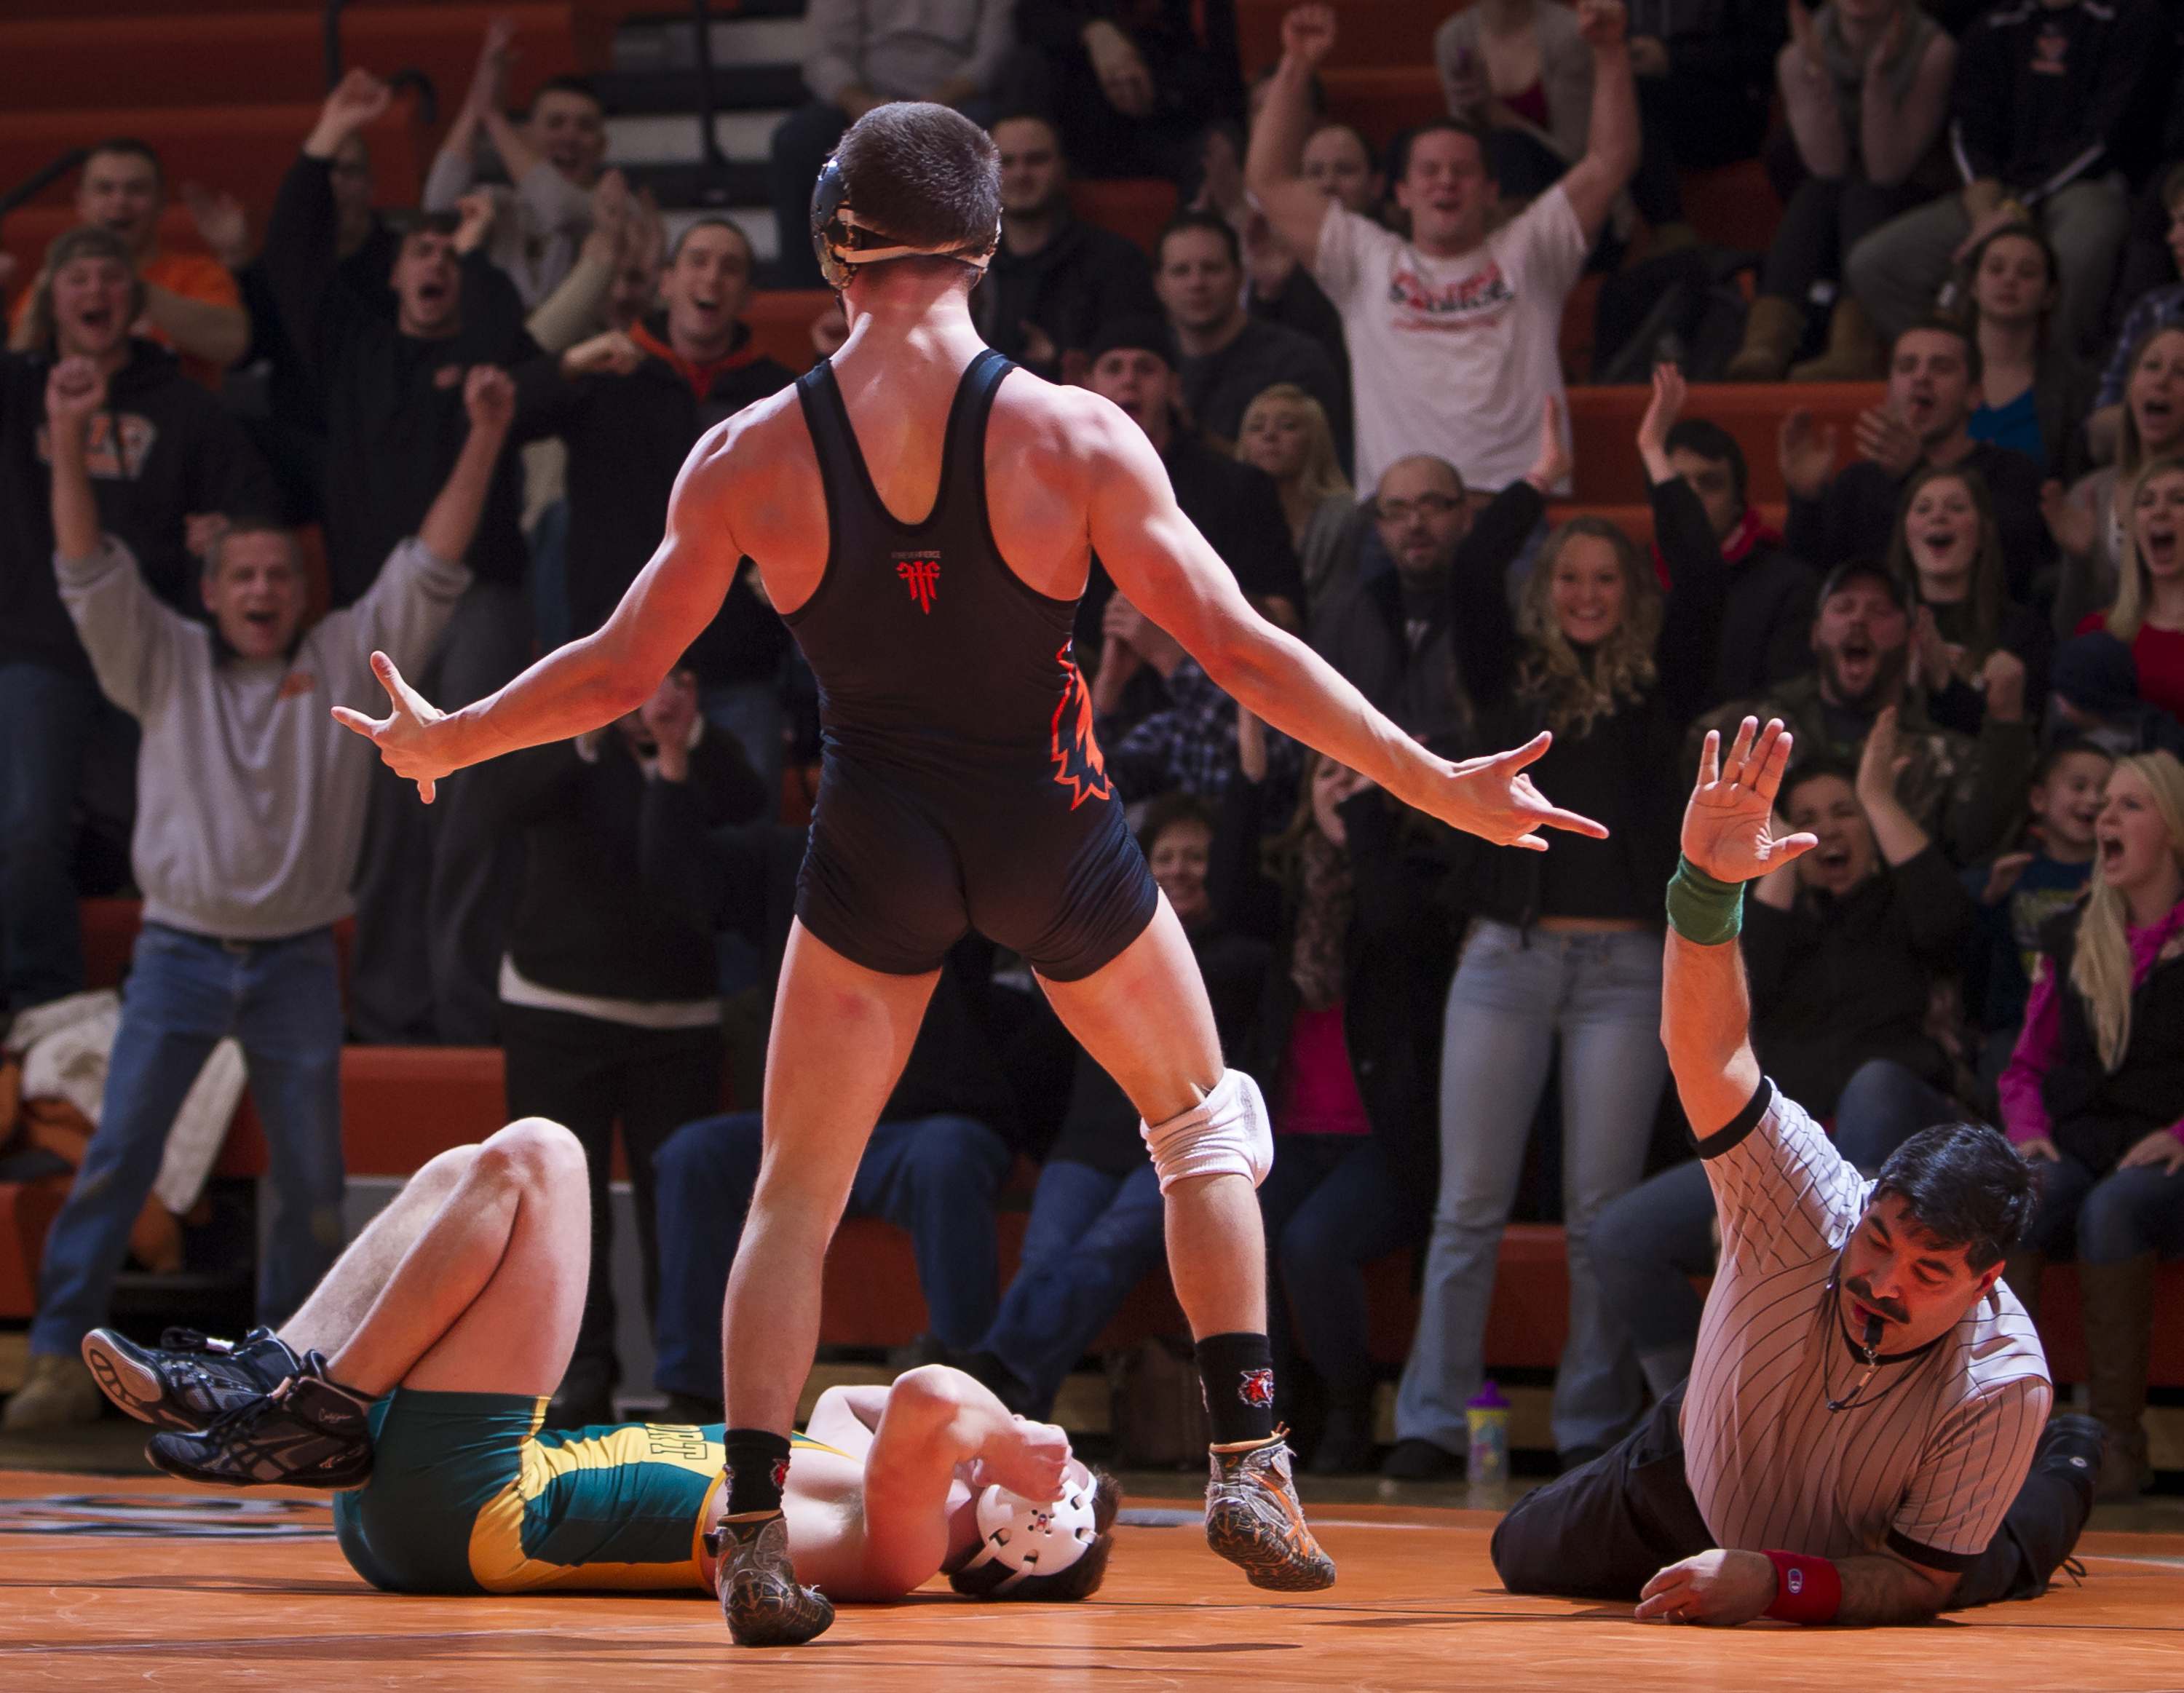 Brad Mayville, Rochester Institute of Technology, celebrates after winning the 149 pound bout by pin during senior night at RIT on Jan. 28, 2015. Mayville is a senior.